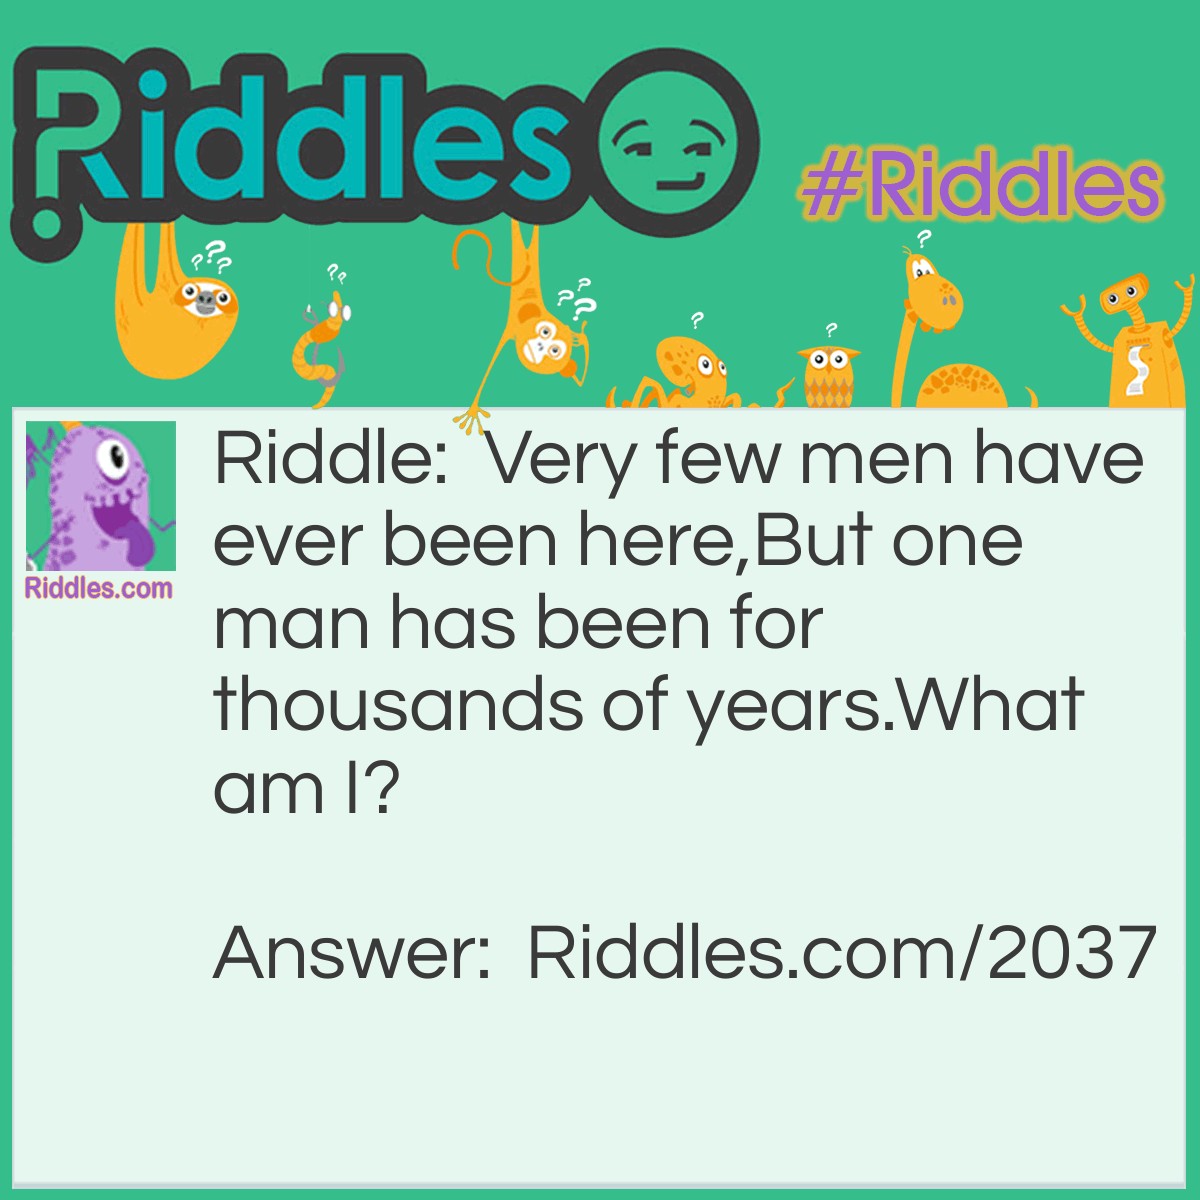 Riddle: Very few men have ever been here,
But one man has been for thousands of years.
What am I? Answer: The moon